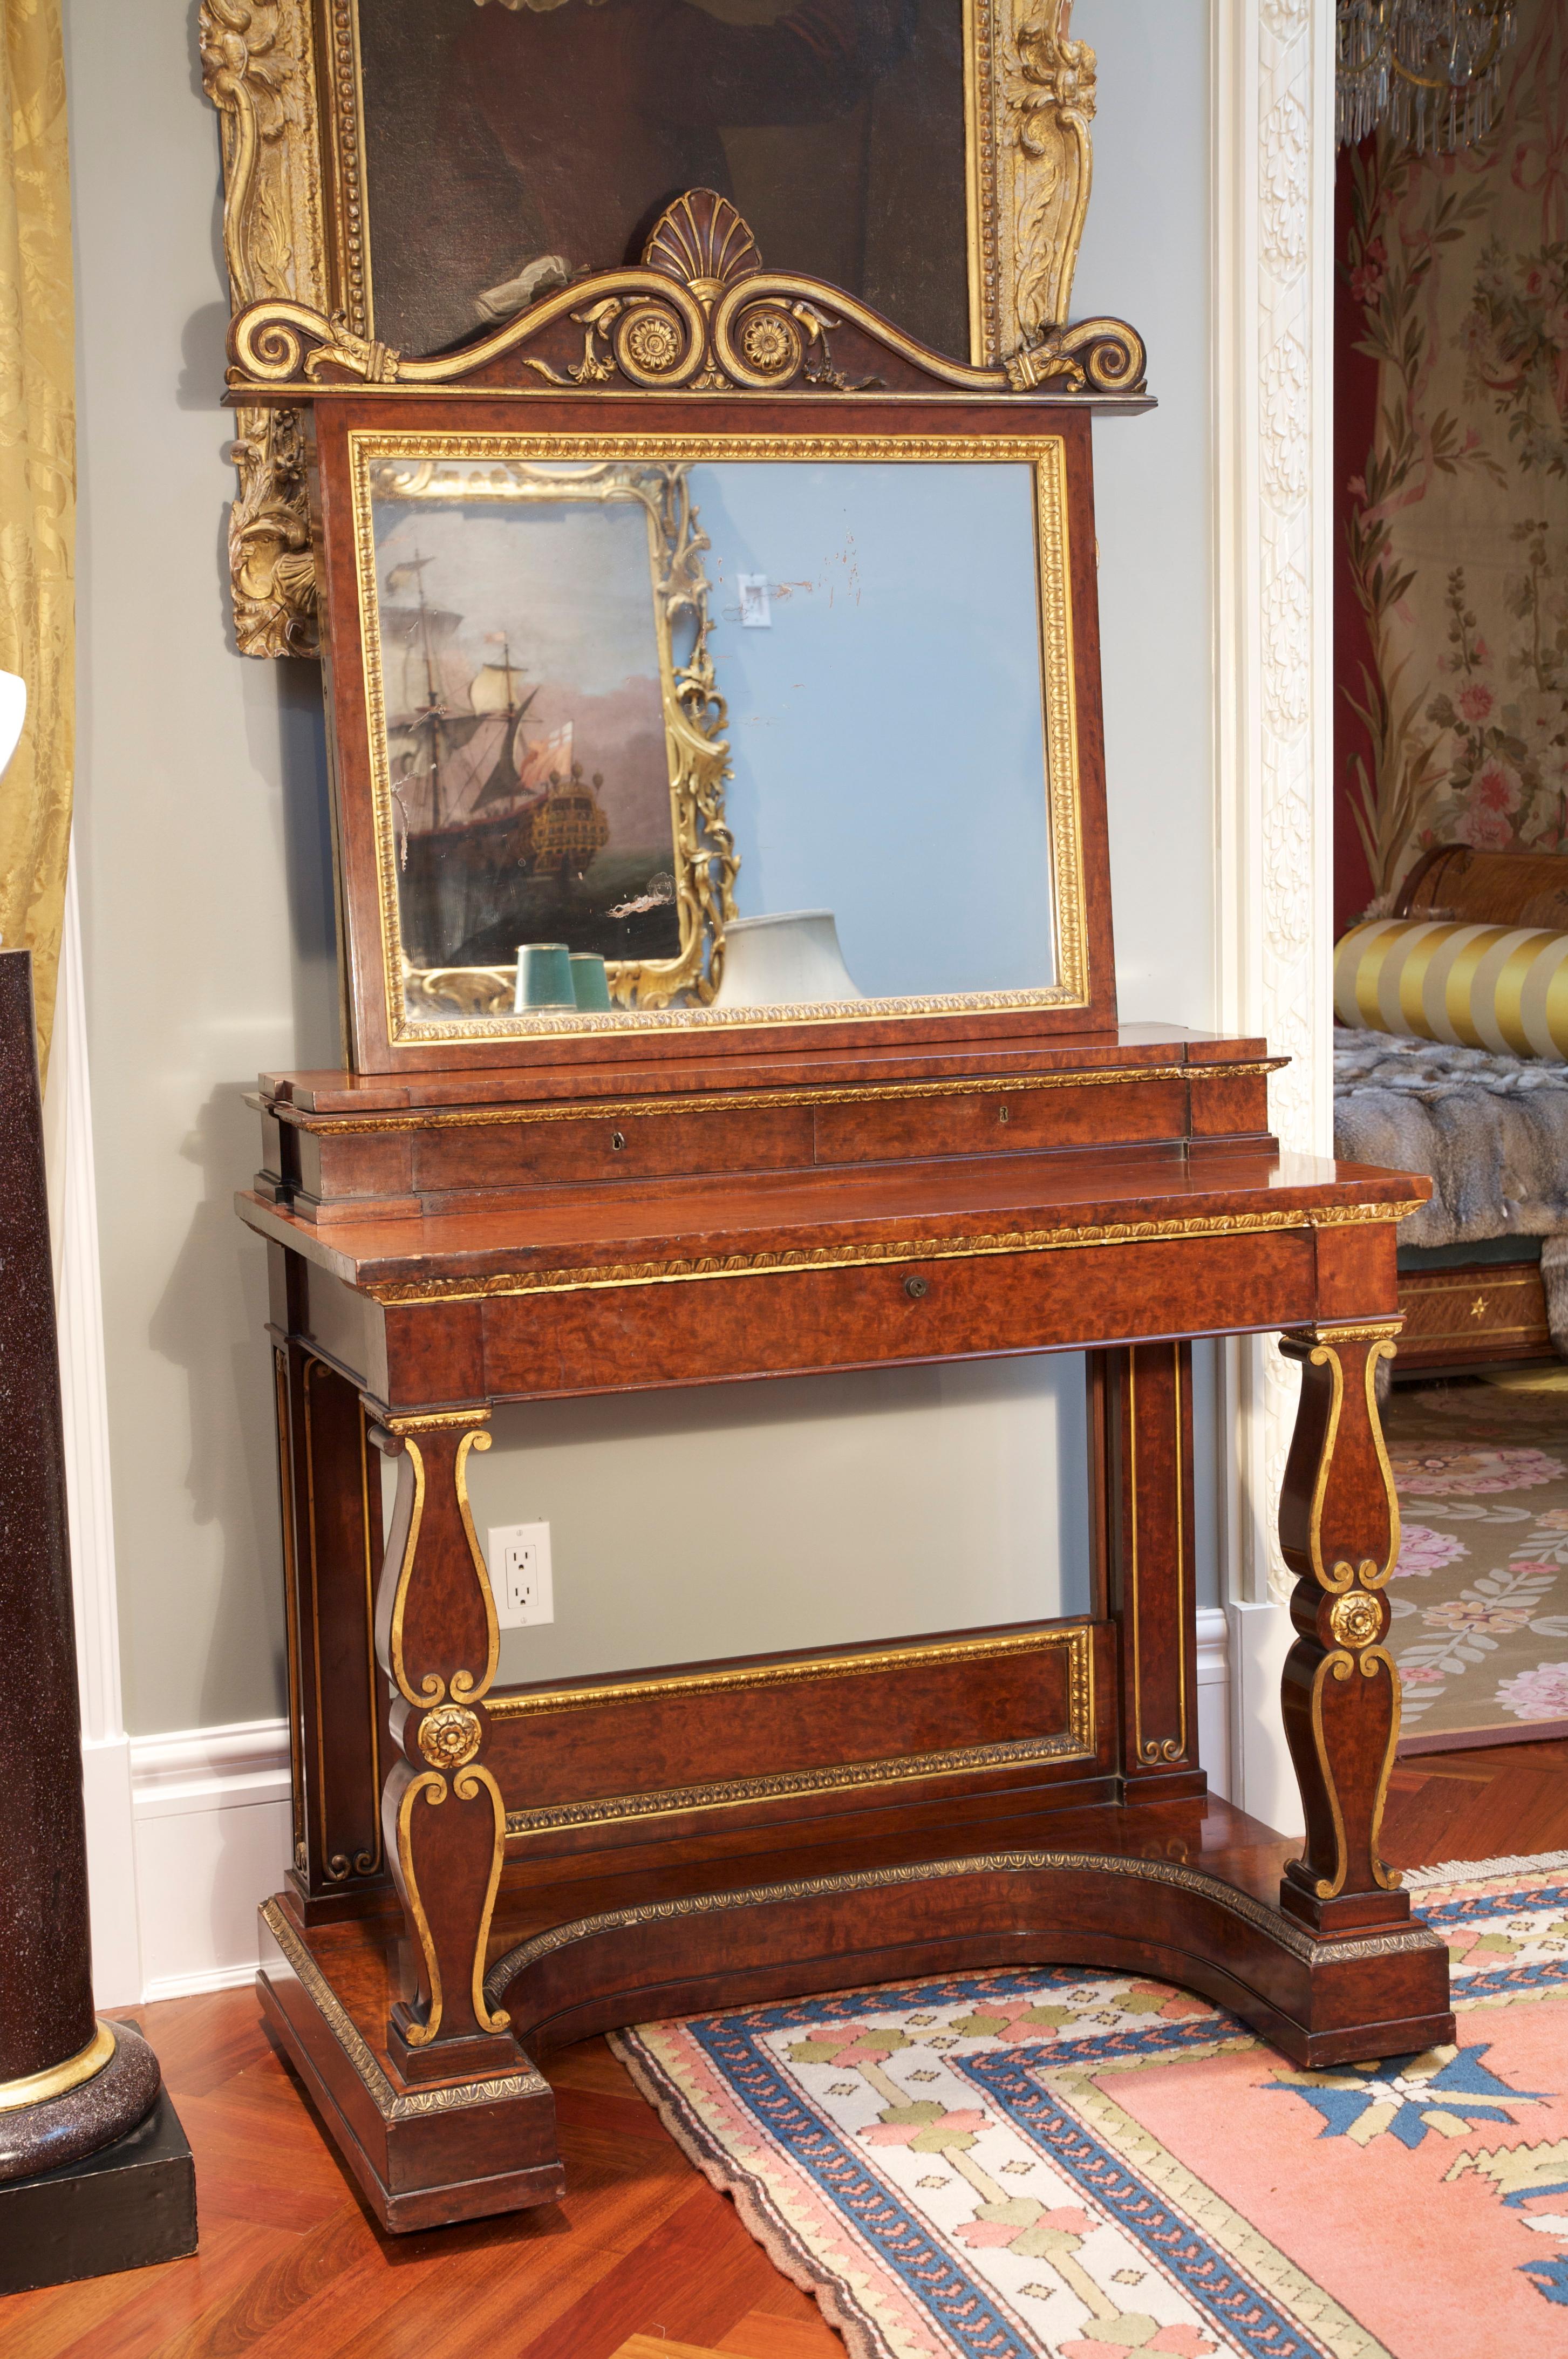  An Exceptional English Regency Dressing Table with a Royal Family Provenance 7